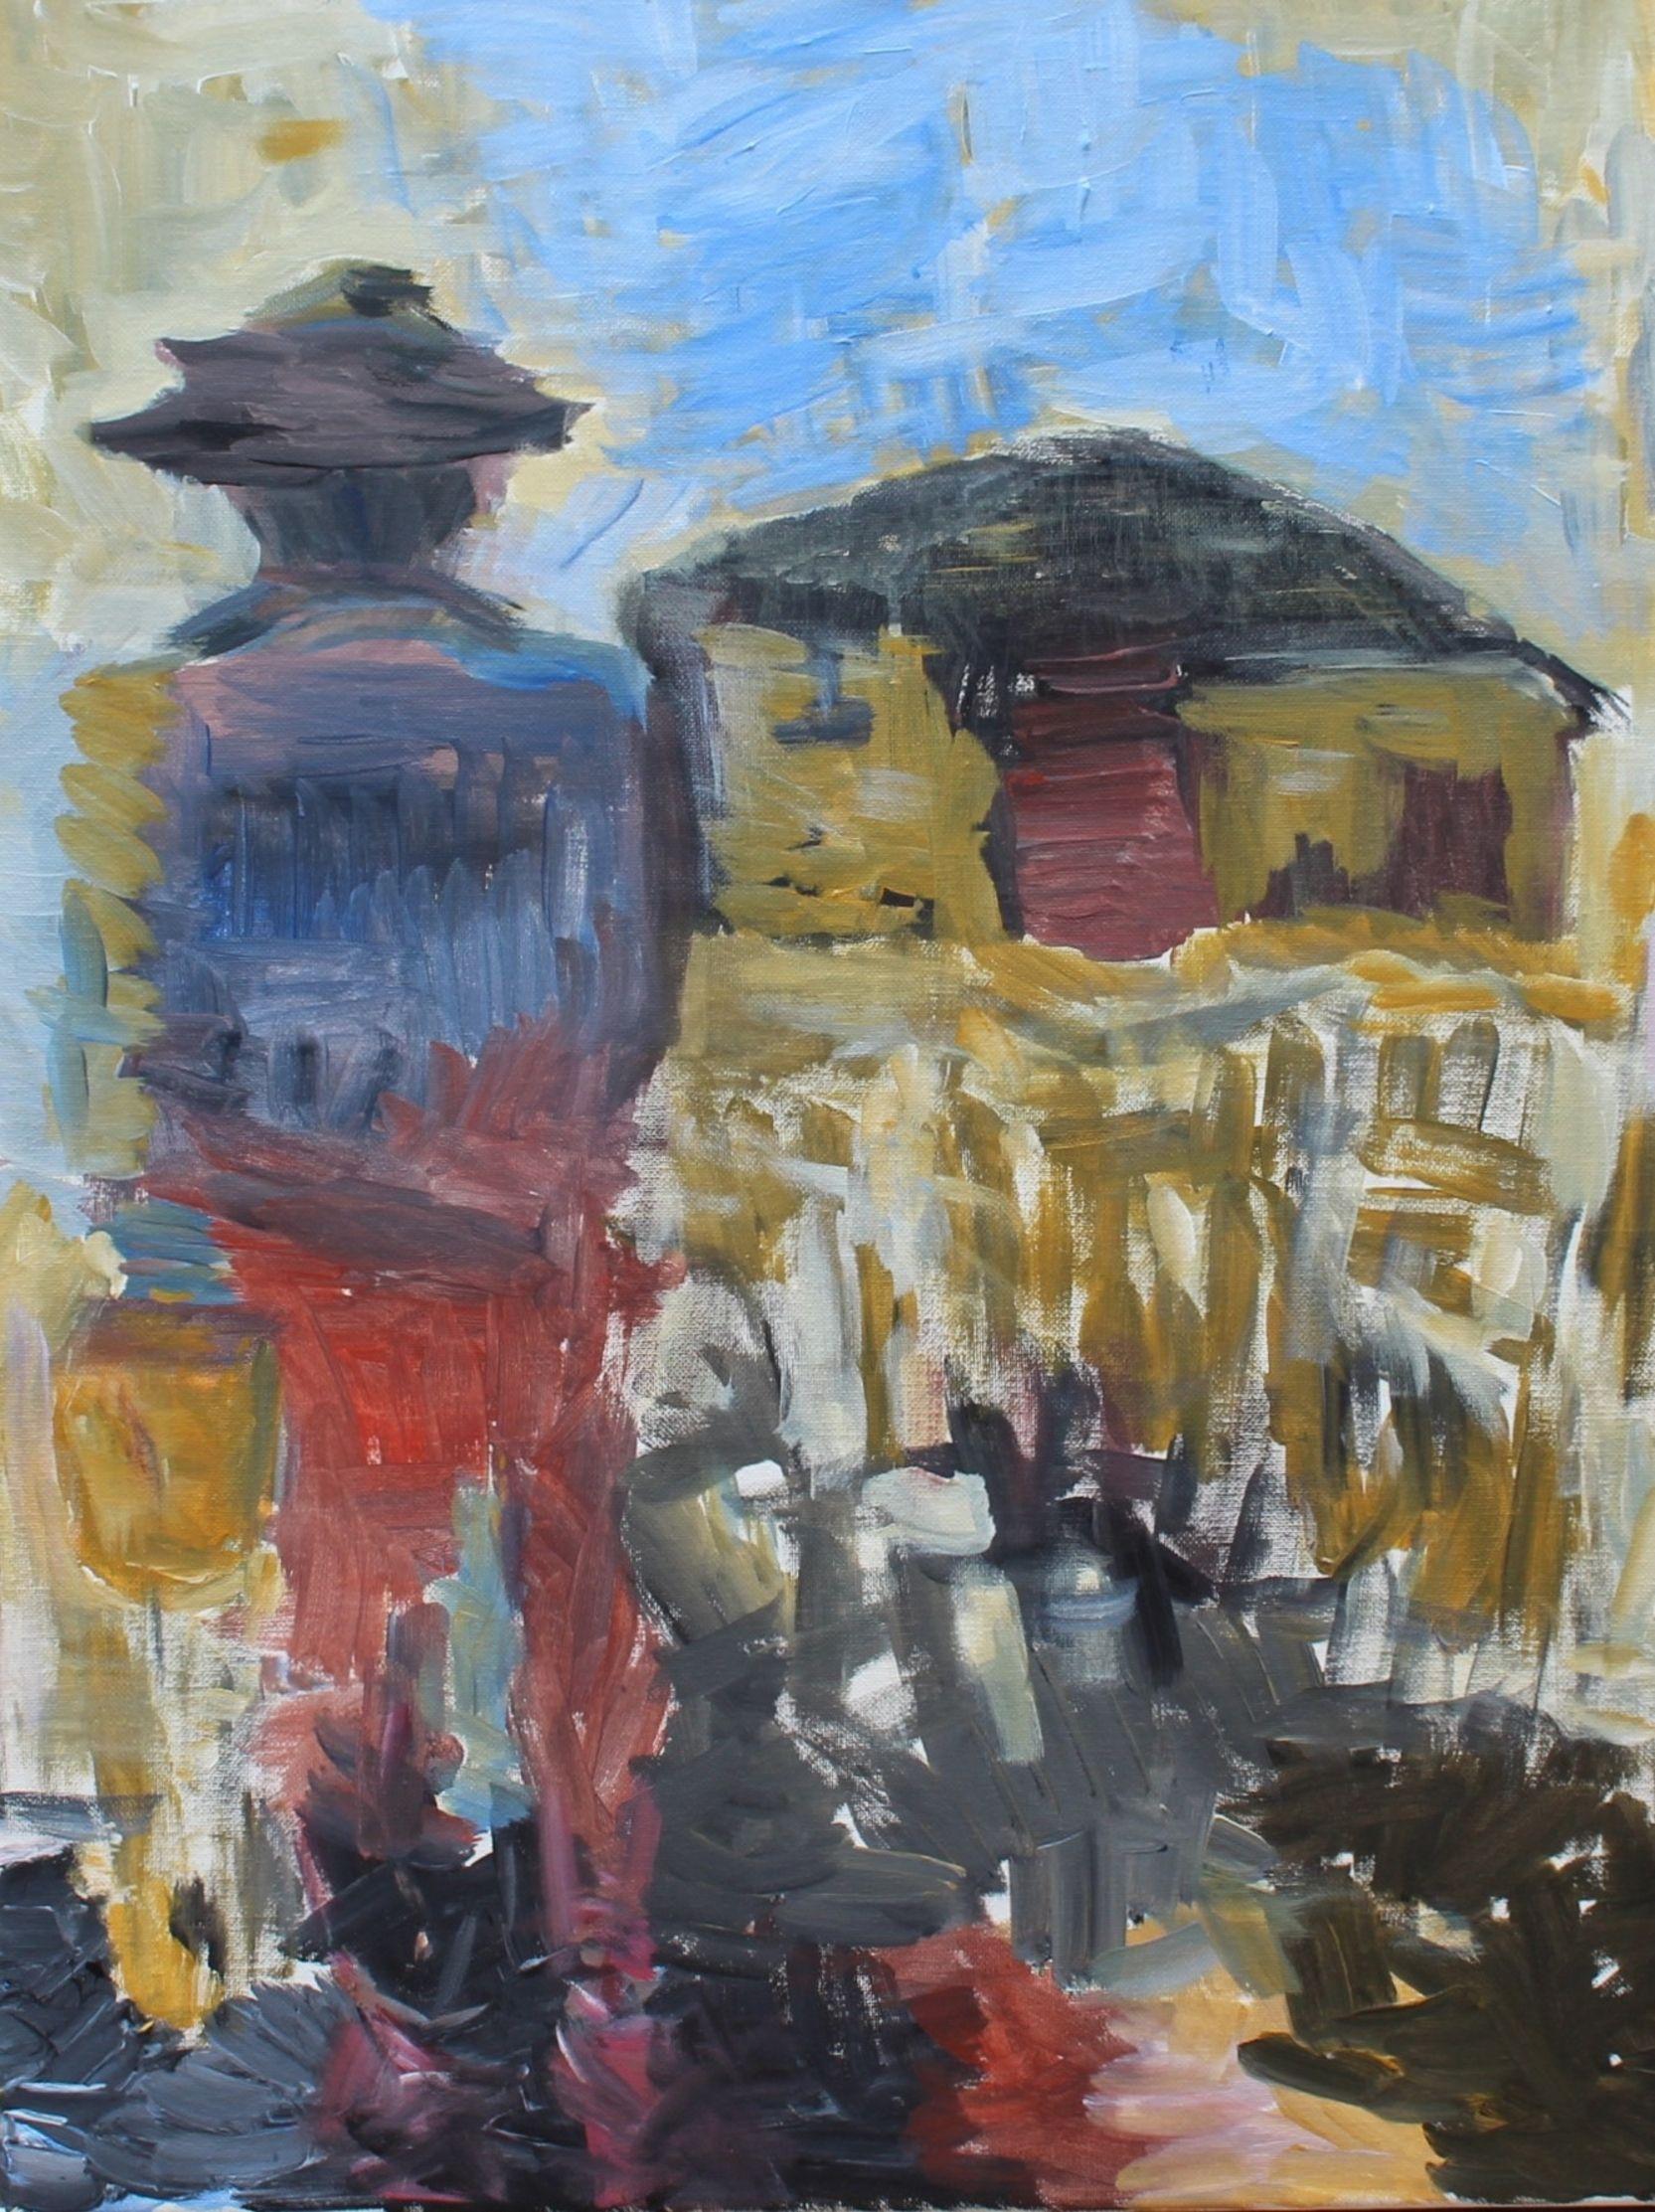 A house, a traveler, who stands and looks at it, theme of nostalgia, theme of return to your own soul, that the house represents, after drifting away from it for a long time  :: Painting :: Expressionism :: This piece comes with an official